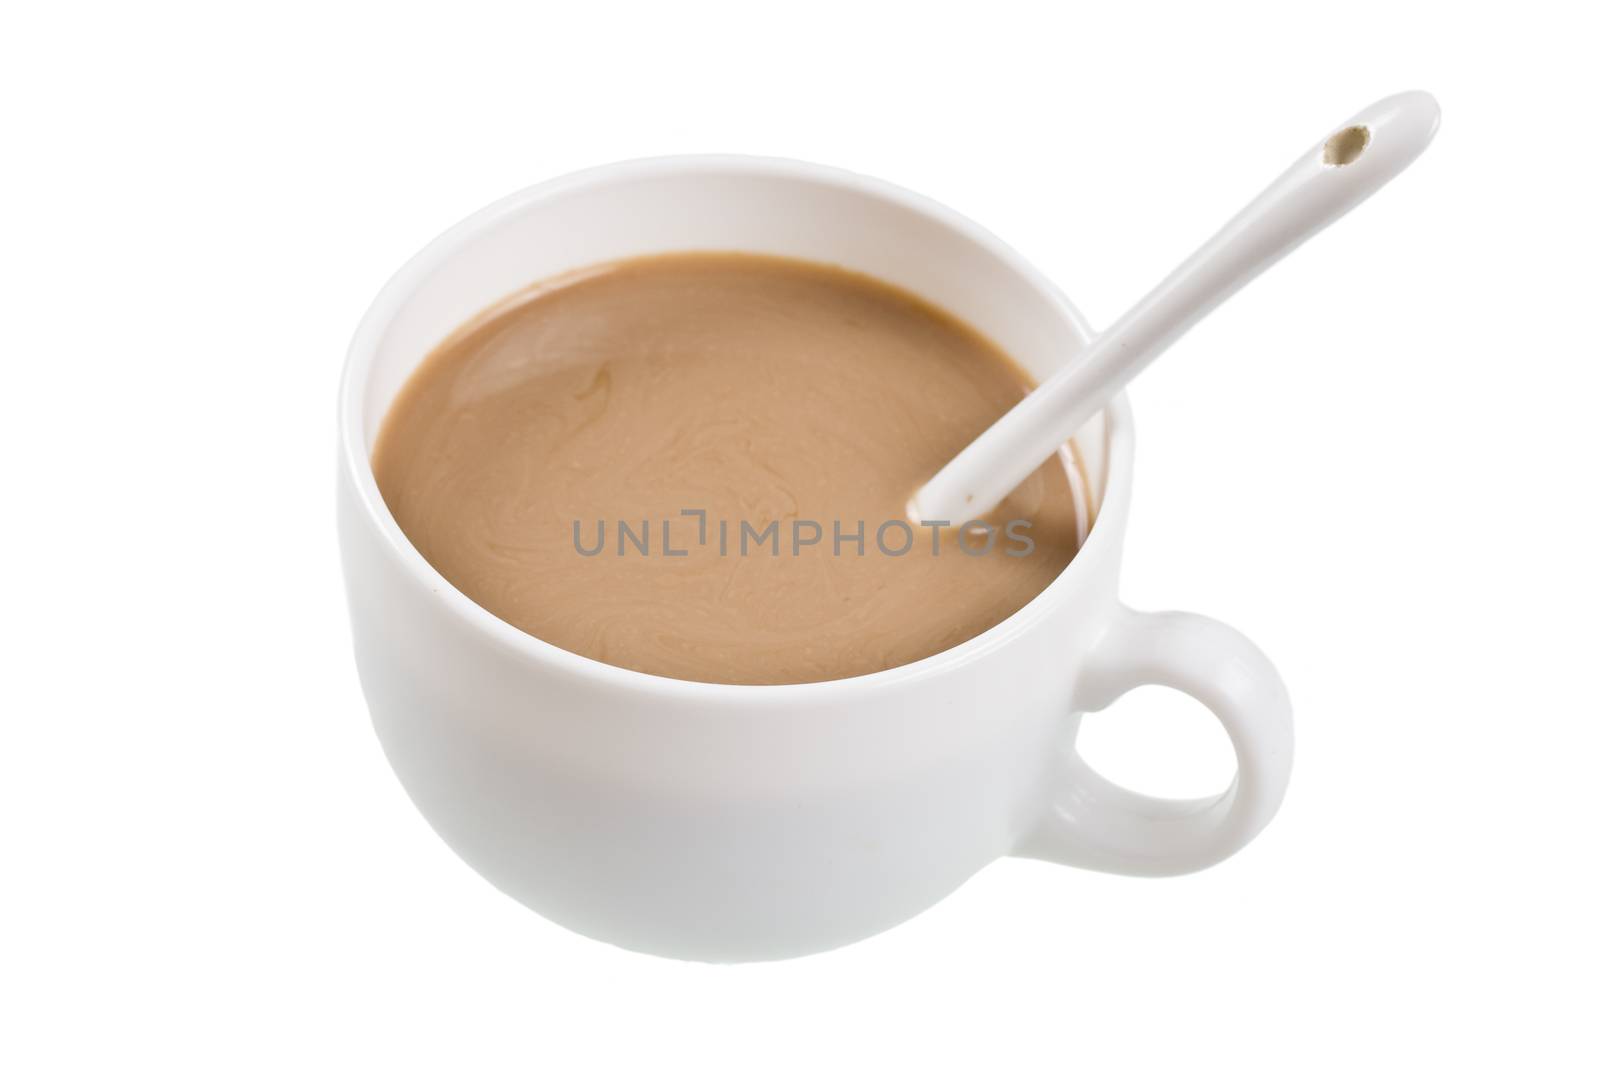 Top view cup of chocolate isolated on white background.